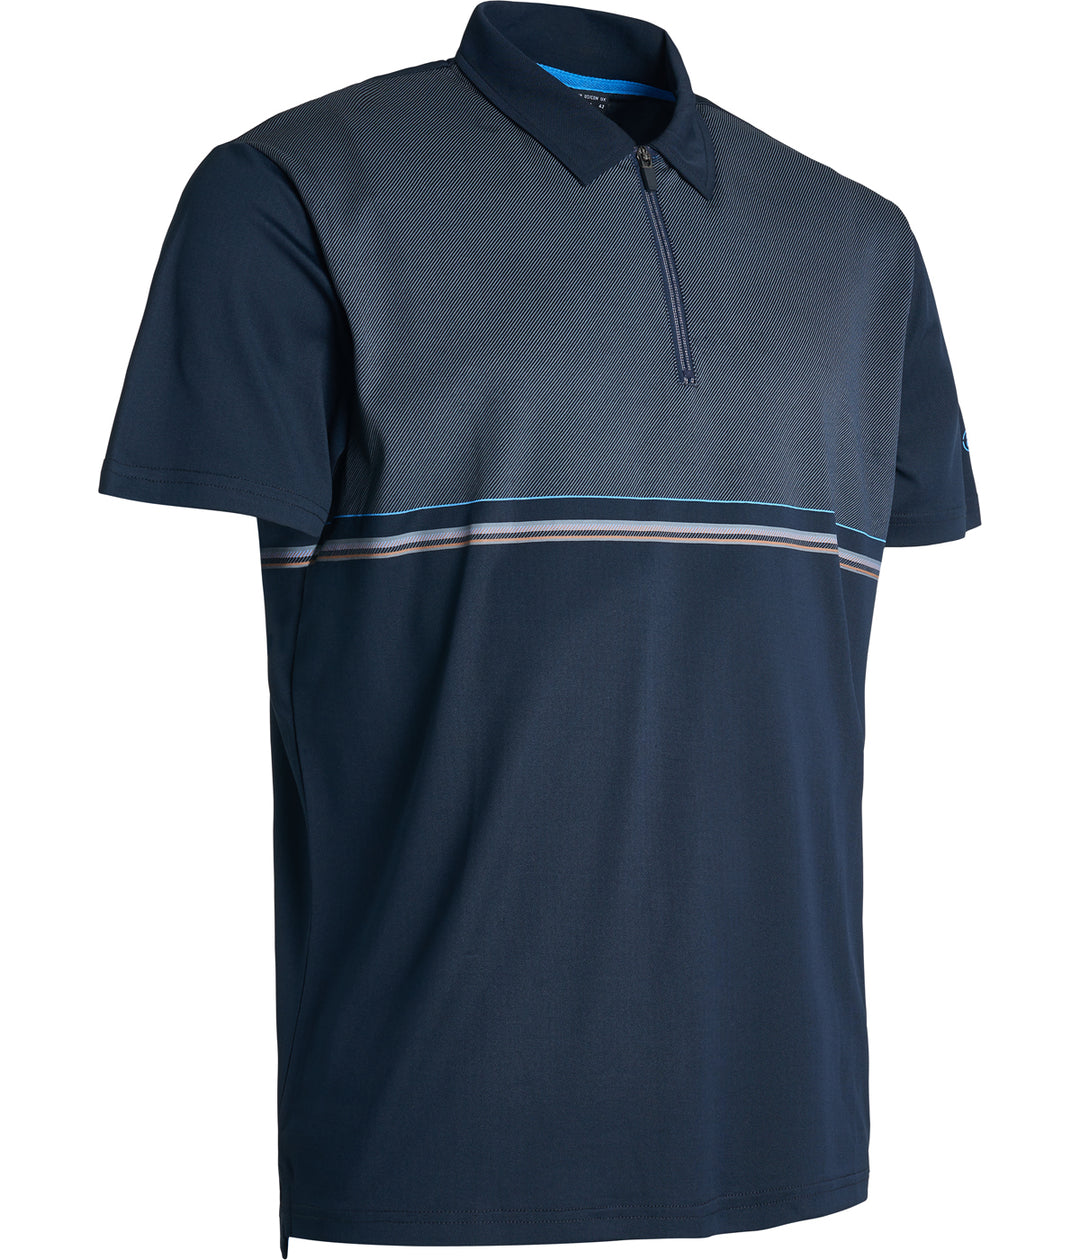 Abacus Sports Wear: Men’s High-Performance Golf Polo – Bulger